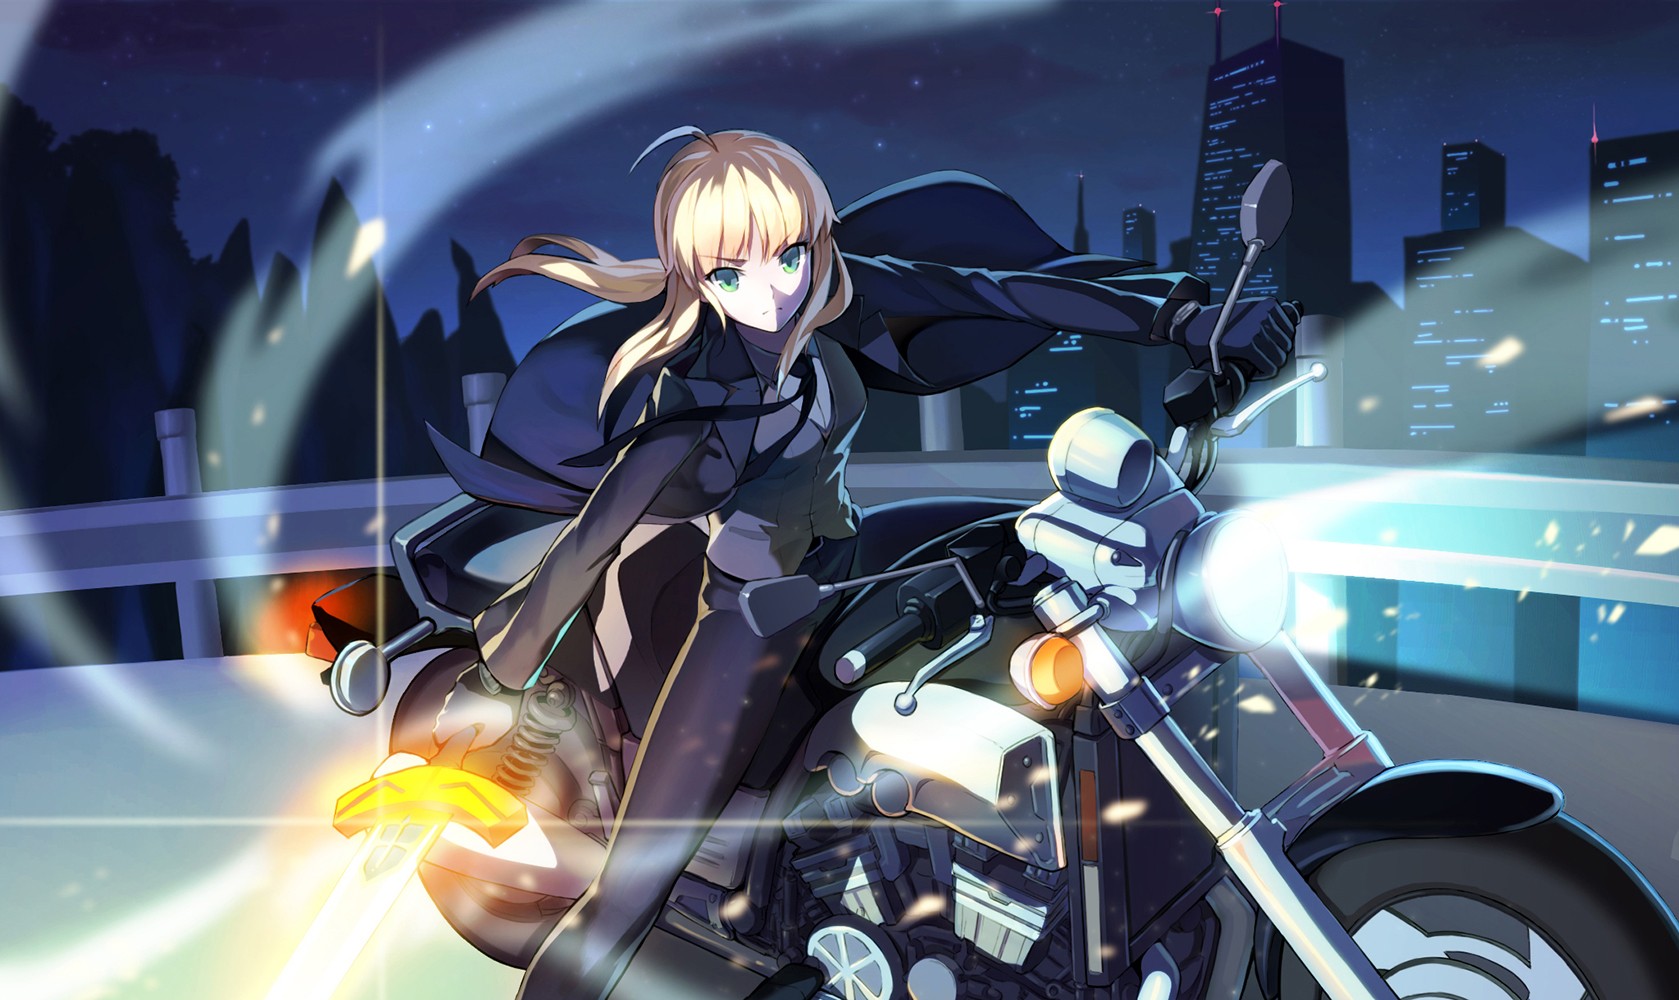 Anime 1679x1000 Fate series anime anime girls sword motorcycle Saber Fate/Zero blonde Artoria Pendragon vehicle women with motorcycles suits